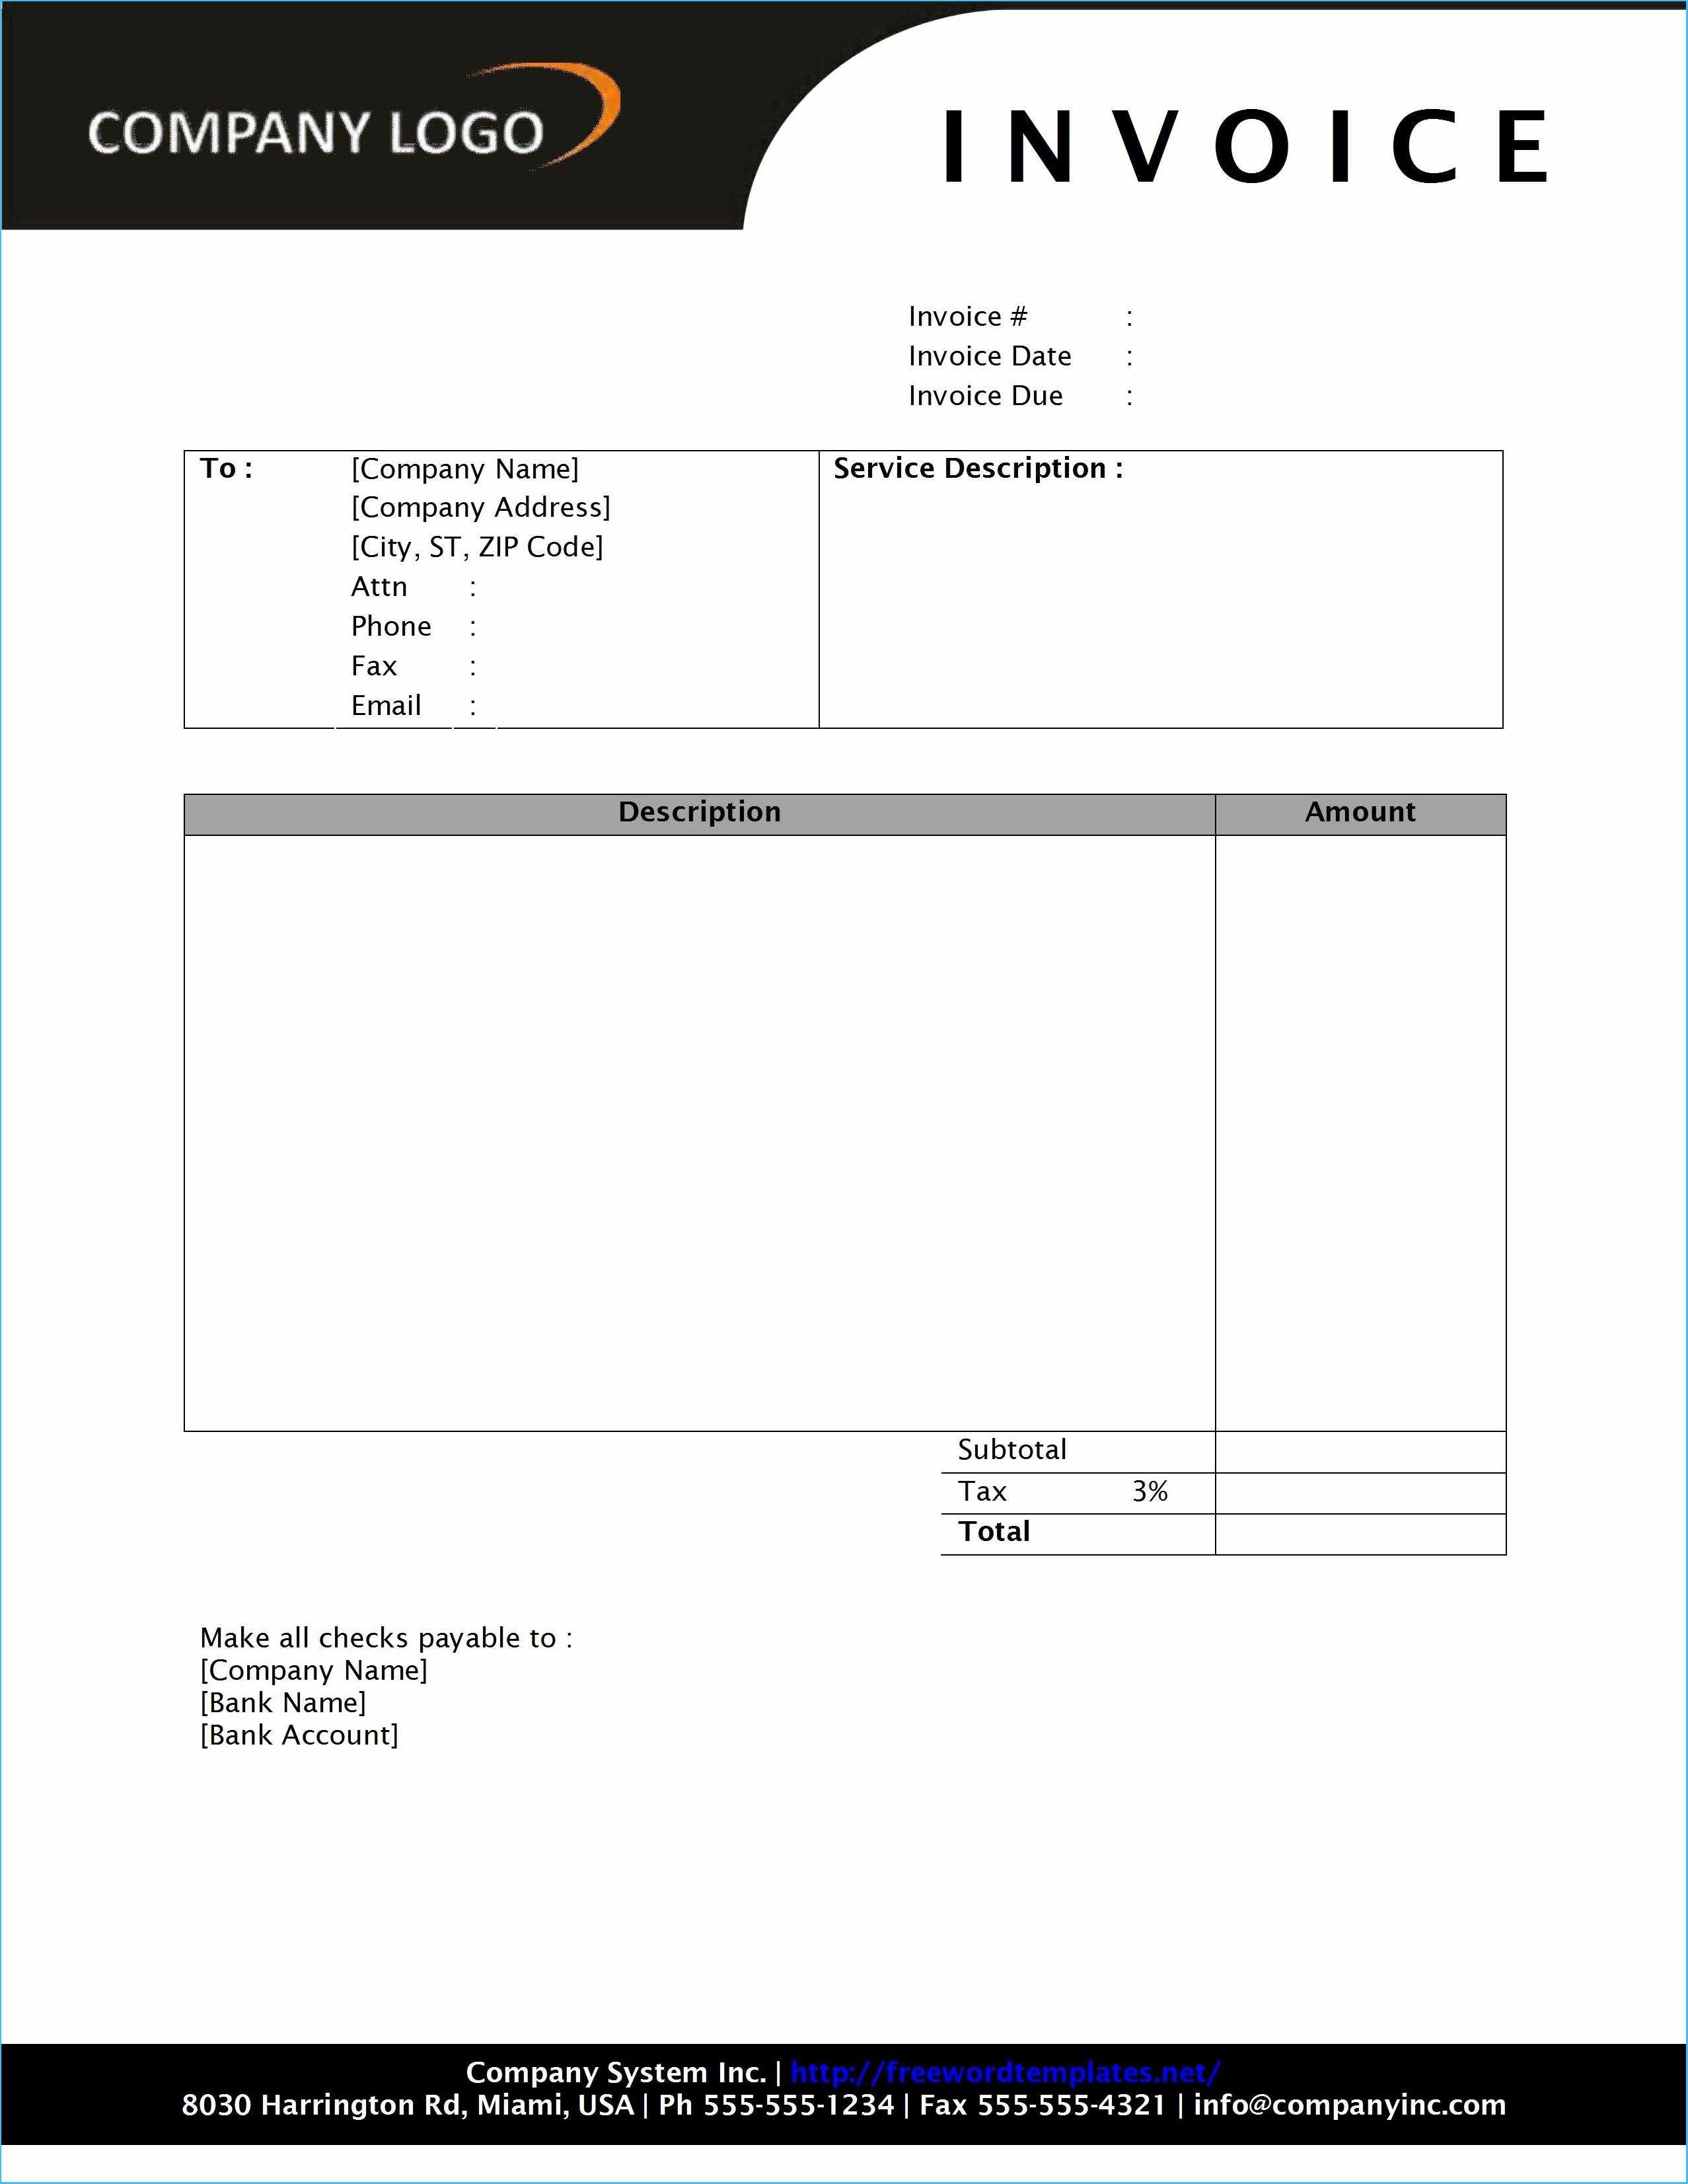 Latest Invoice Template Word 2010 Which You Need To Make Throughout Invoice Template Word 2010